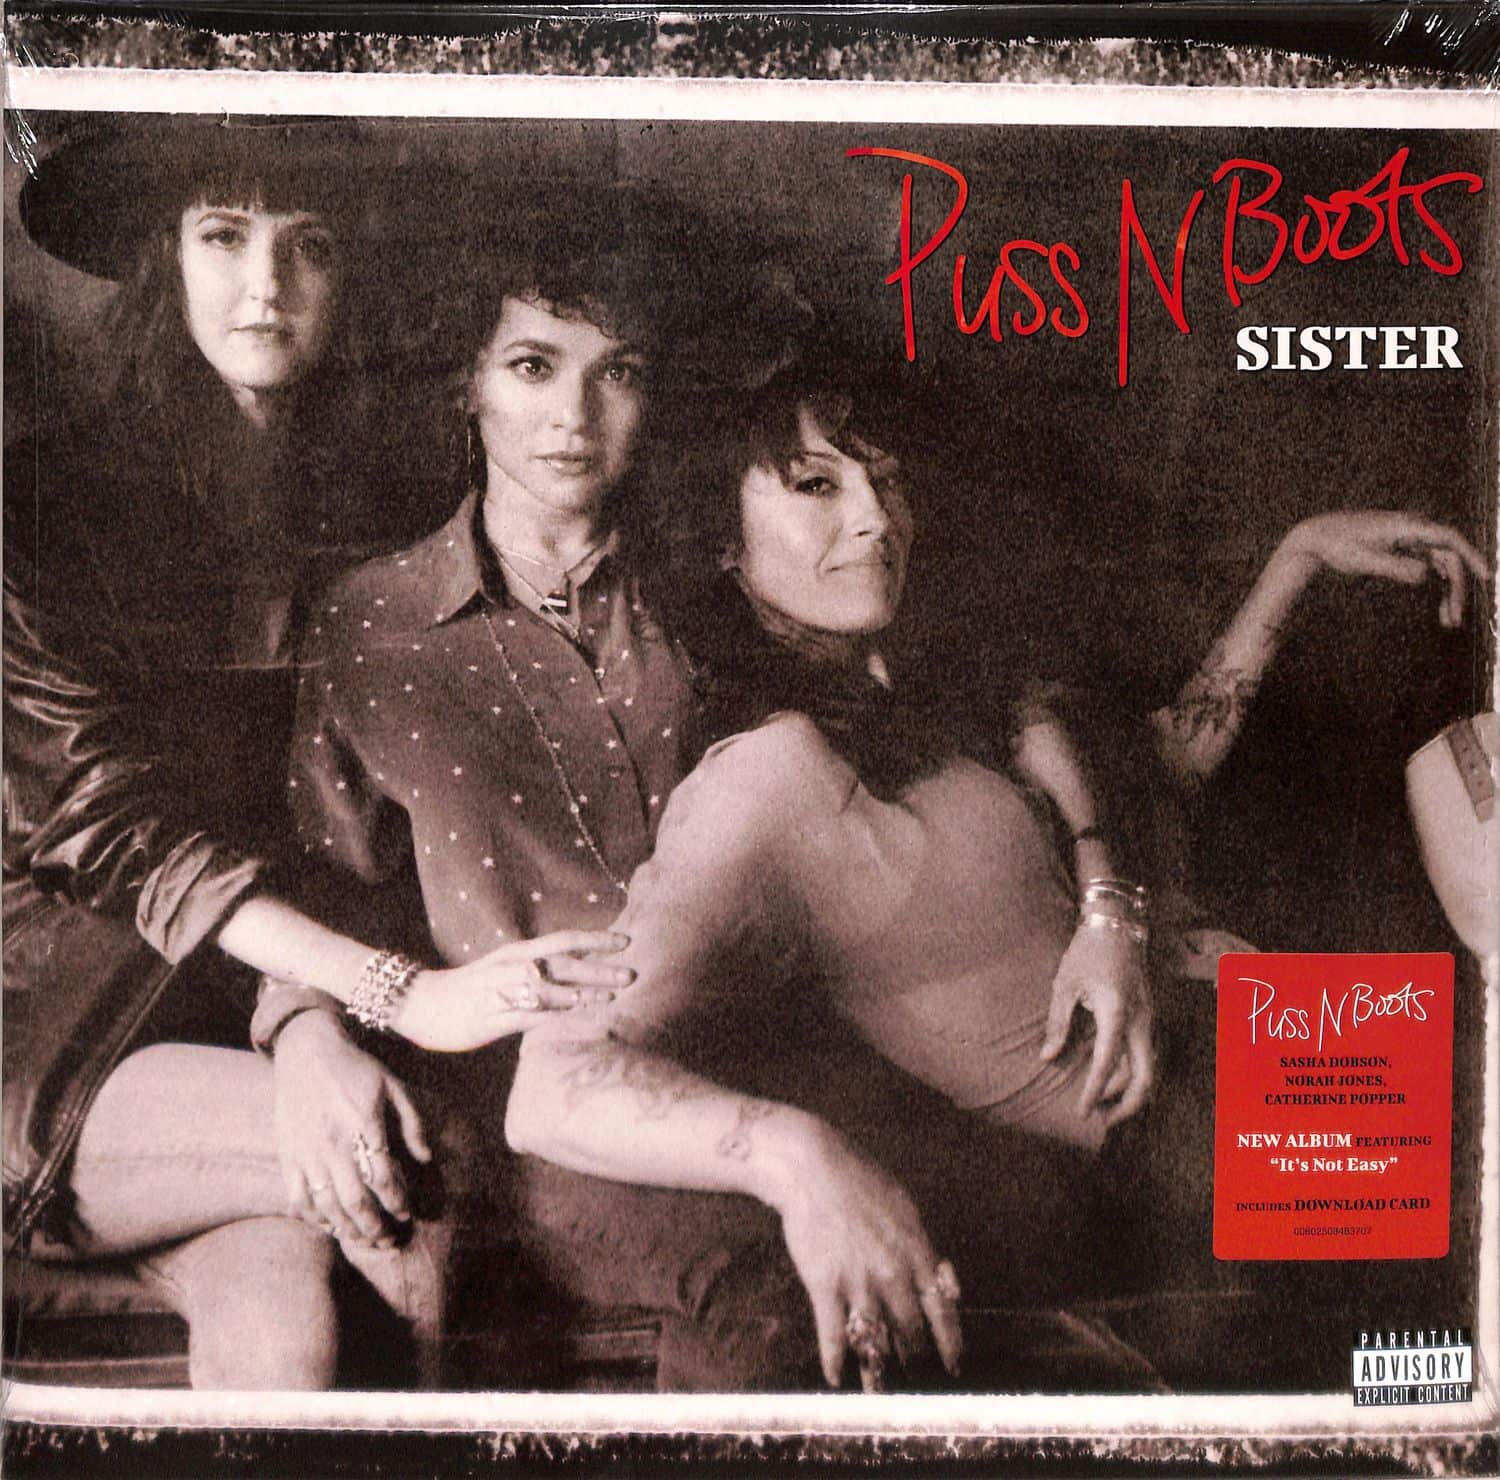 Puss N Boots - SISTER 